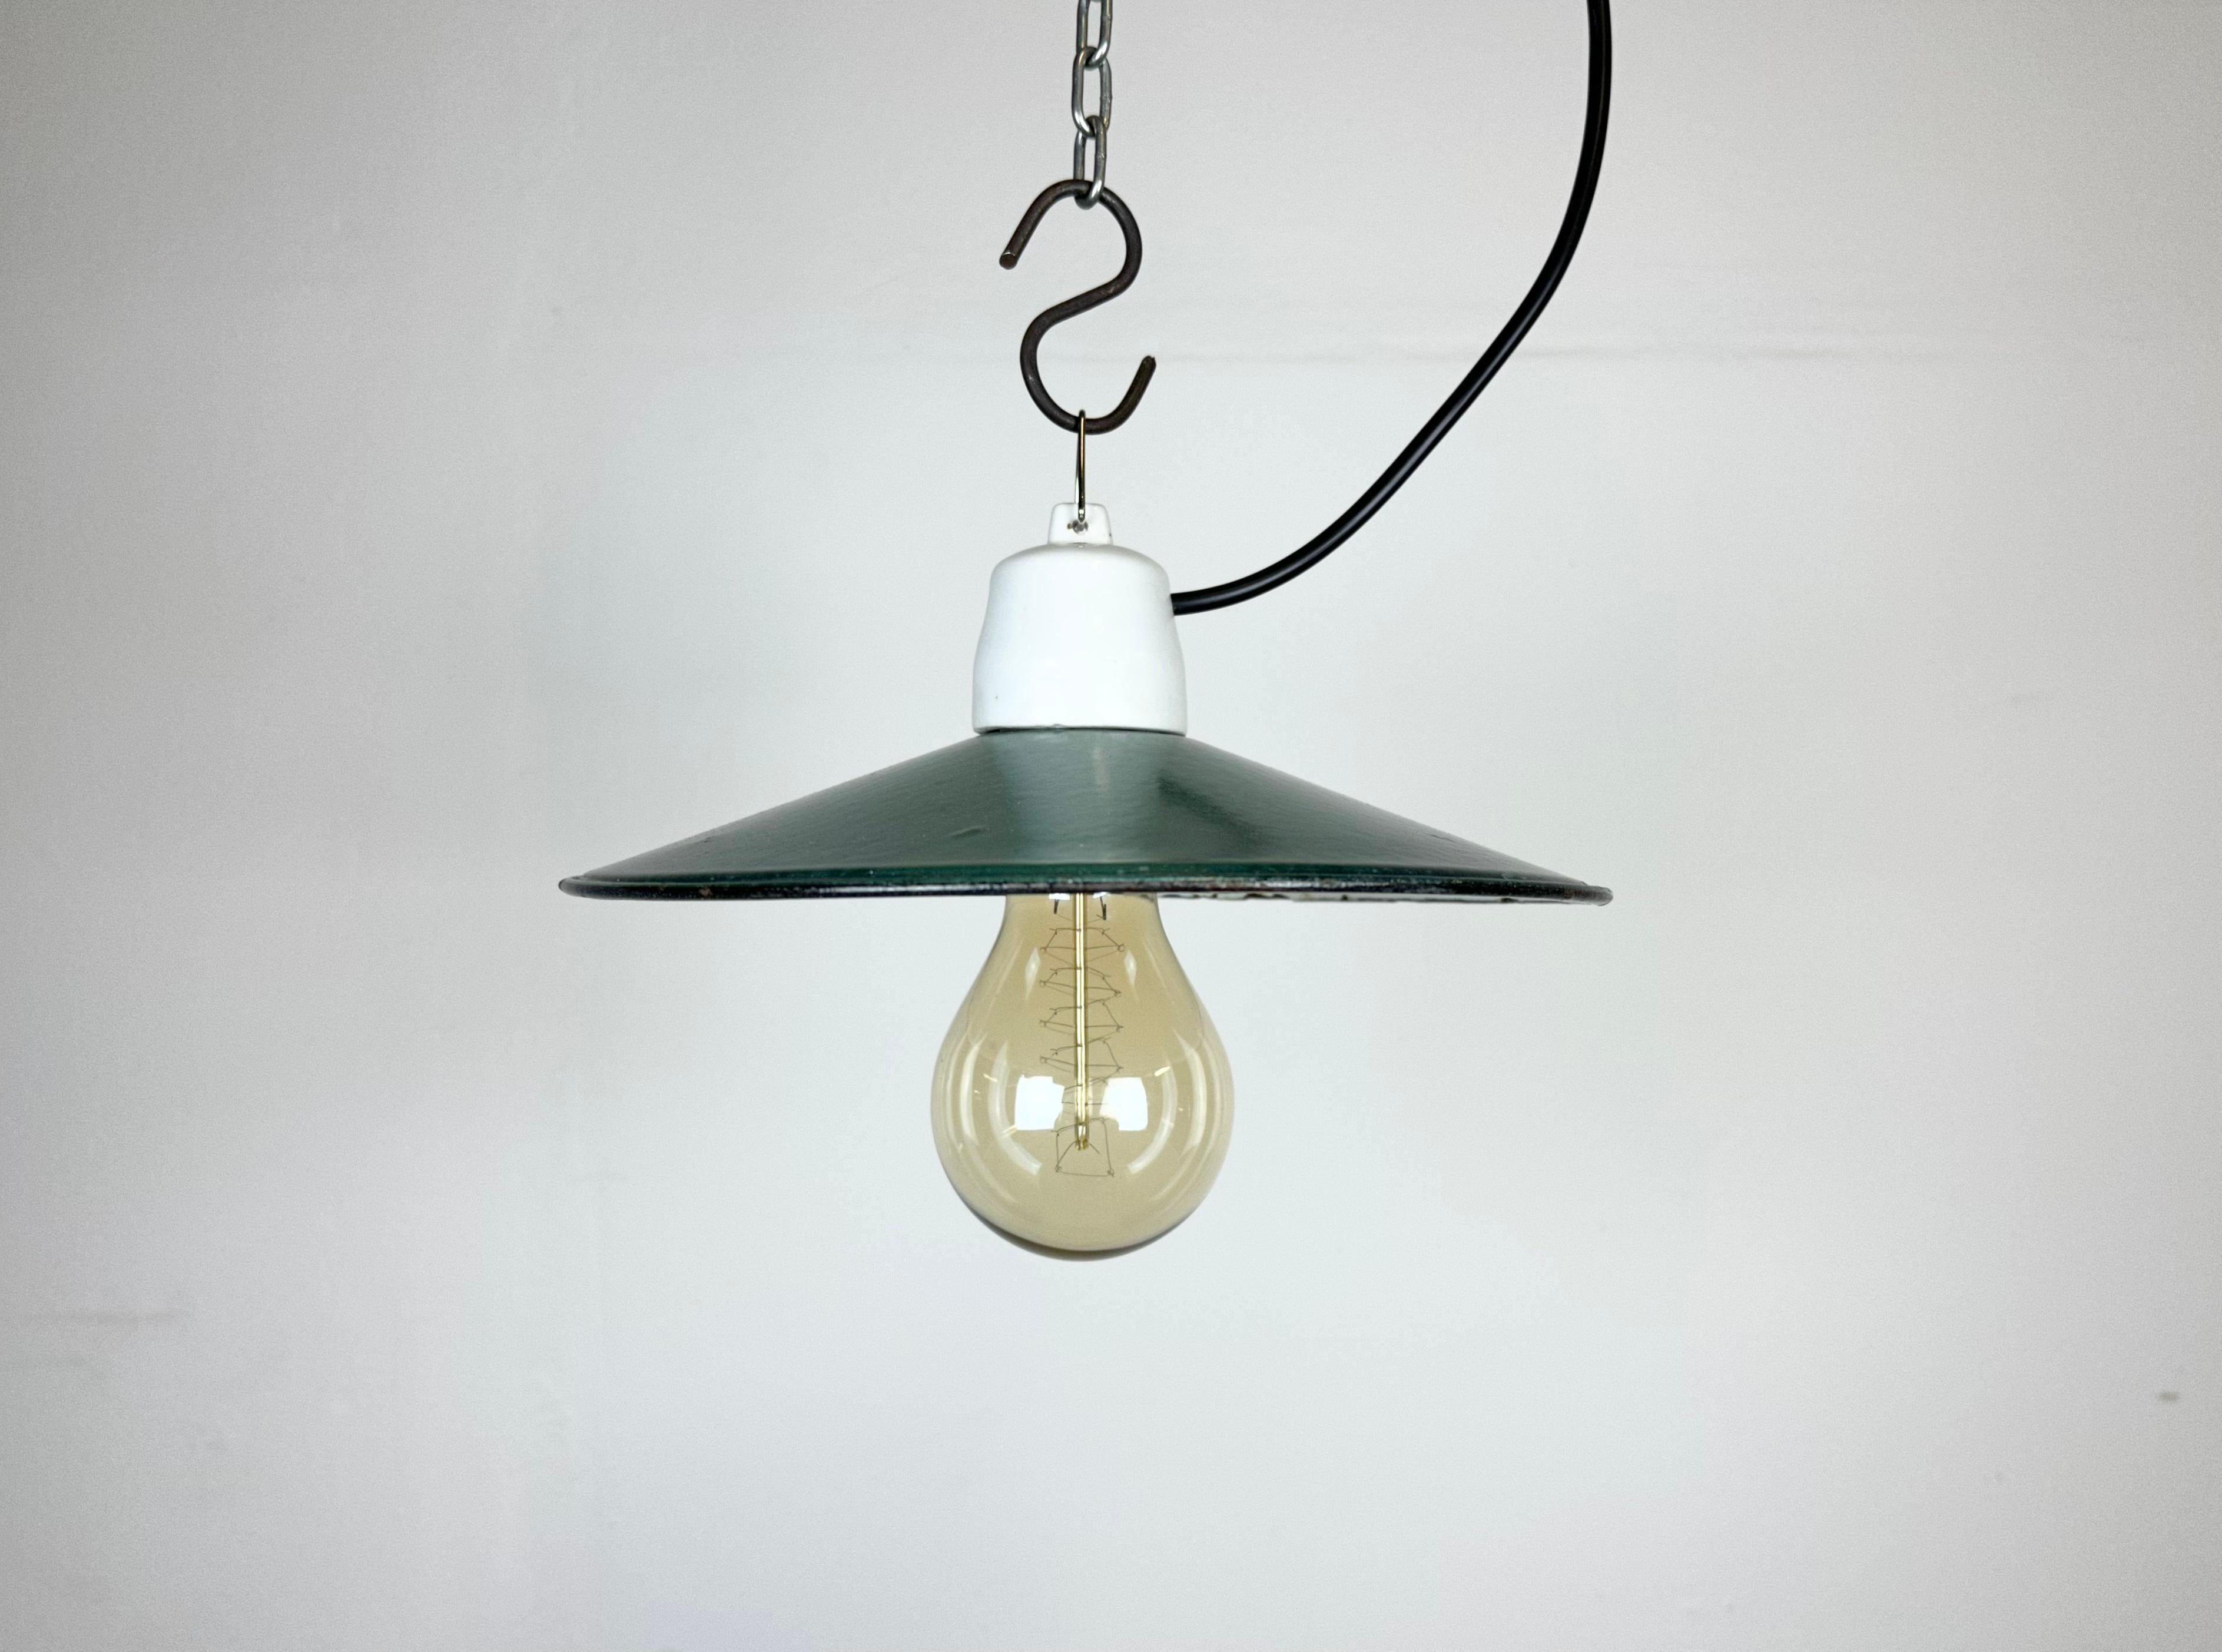 Vintage industrial enamel pendant lamp made in Poland during the 1970s. It features a green enamel shade with white enamel interior and porcelain top. The socket requires E 27/ E 26 light bulbs. The weight of the lamp is 0,5 kg. New wire.
The light